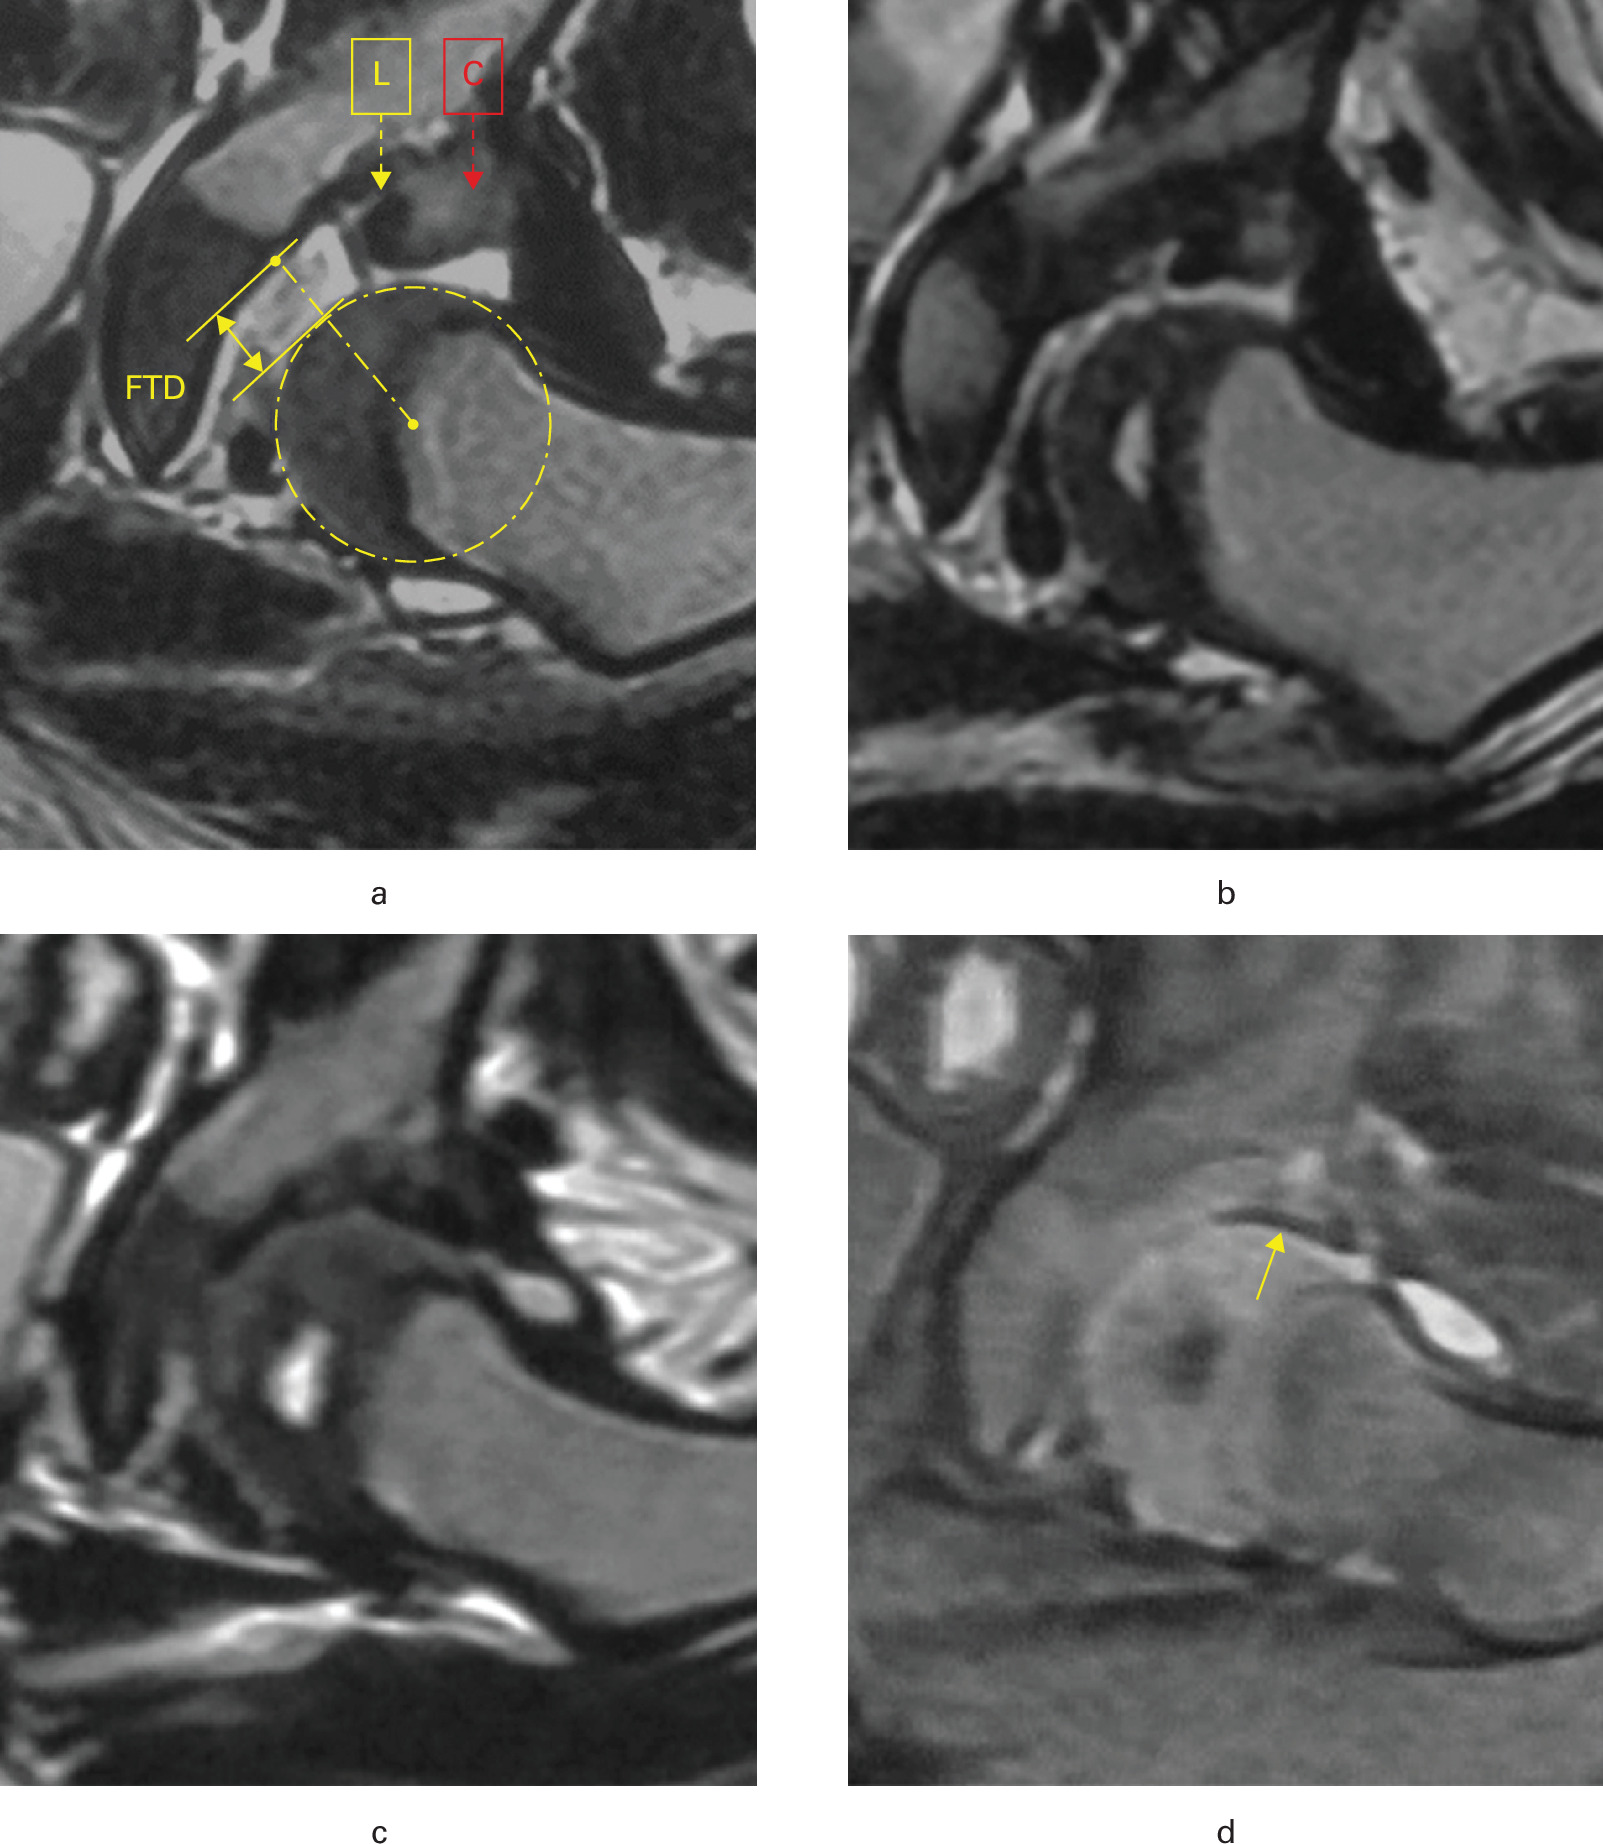 Fig. 1 
            MRI scans in the coronal plane of a 13-month-old female patient with left developmental dysplasia of the hip treated by closed reduction and spica cast immobilization. a) Immediately after the initial reduction, incomplete reduction (femoral head to tricartilage distance (FTD) = 6.68 mm) and inverted labrum-acetabular cartilage complex (LACC) are seen on the T2 weight image (T2WI) scan; FTD was calculated by the distance between the centre of the femoral head and the lateral edge of the triradiate cartilage minus the radius of the femoral head, and the morphology of the LACC was determined by the direction of acetabular labrum (low signal intensity, as shown by the yellow arrow) and cartilage (medium signal intensity, as shown by the red arrow). b) At the end of first cast with 67 days’ immobilization, decreased FTD and inverted LACC are seen on the T2WI scan. c) At the end of second cast with a total of 171 days of immobilization, concentric reduction with complete reduction and congruent cartilage are seen on the T2WI scan. d) A residual inverted labrum was found between the femoral head and acetabular cartilage on proton density-weighted imaging scan as shown by the yellow arrow.
          